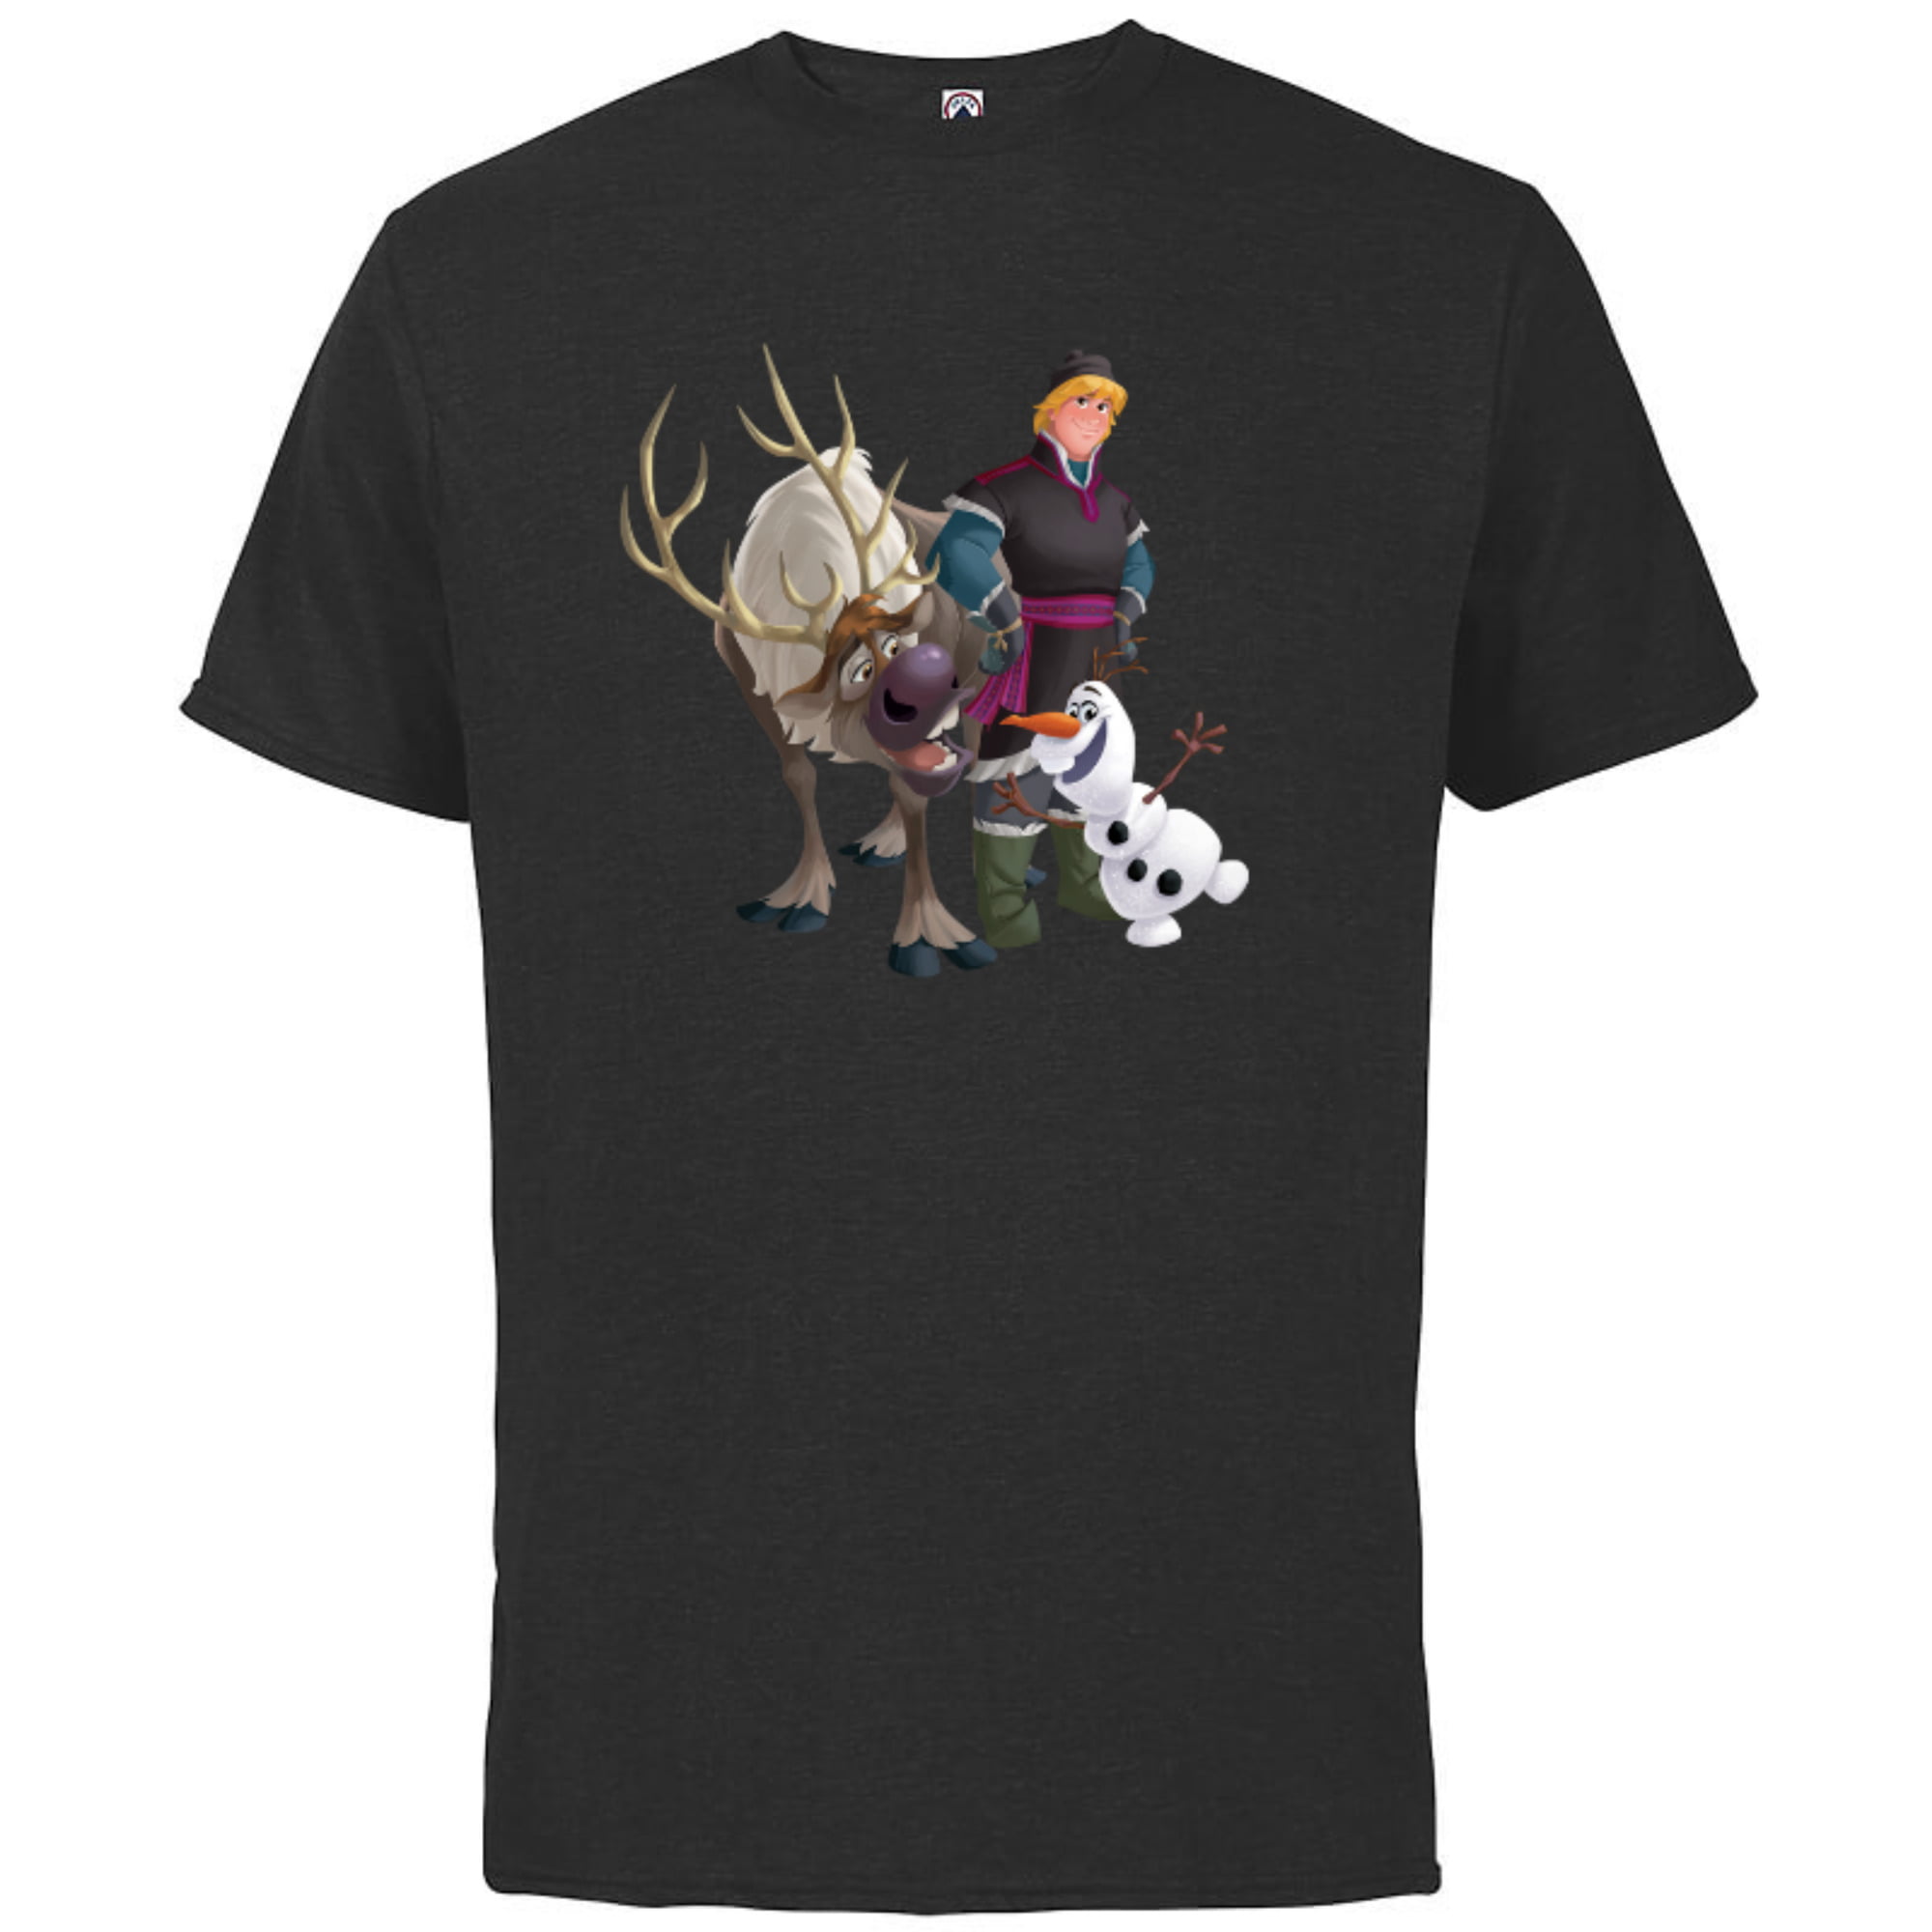 Disney Frozen Kristoff Olaf Sven T-Shirt - Short Sleeve Cotton T-Shirt for  Adults - Customized-Charcoal Heather